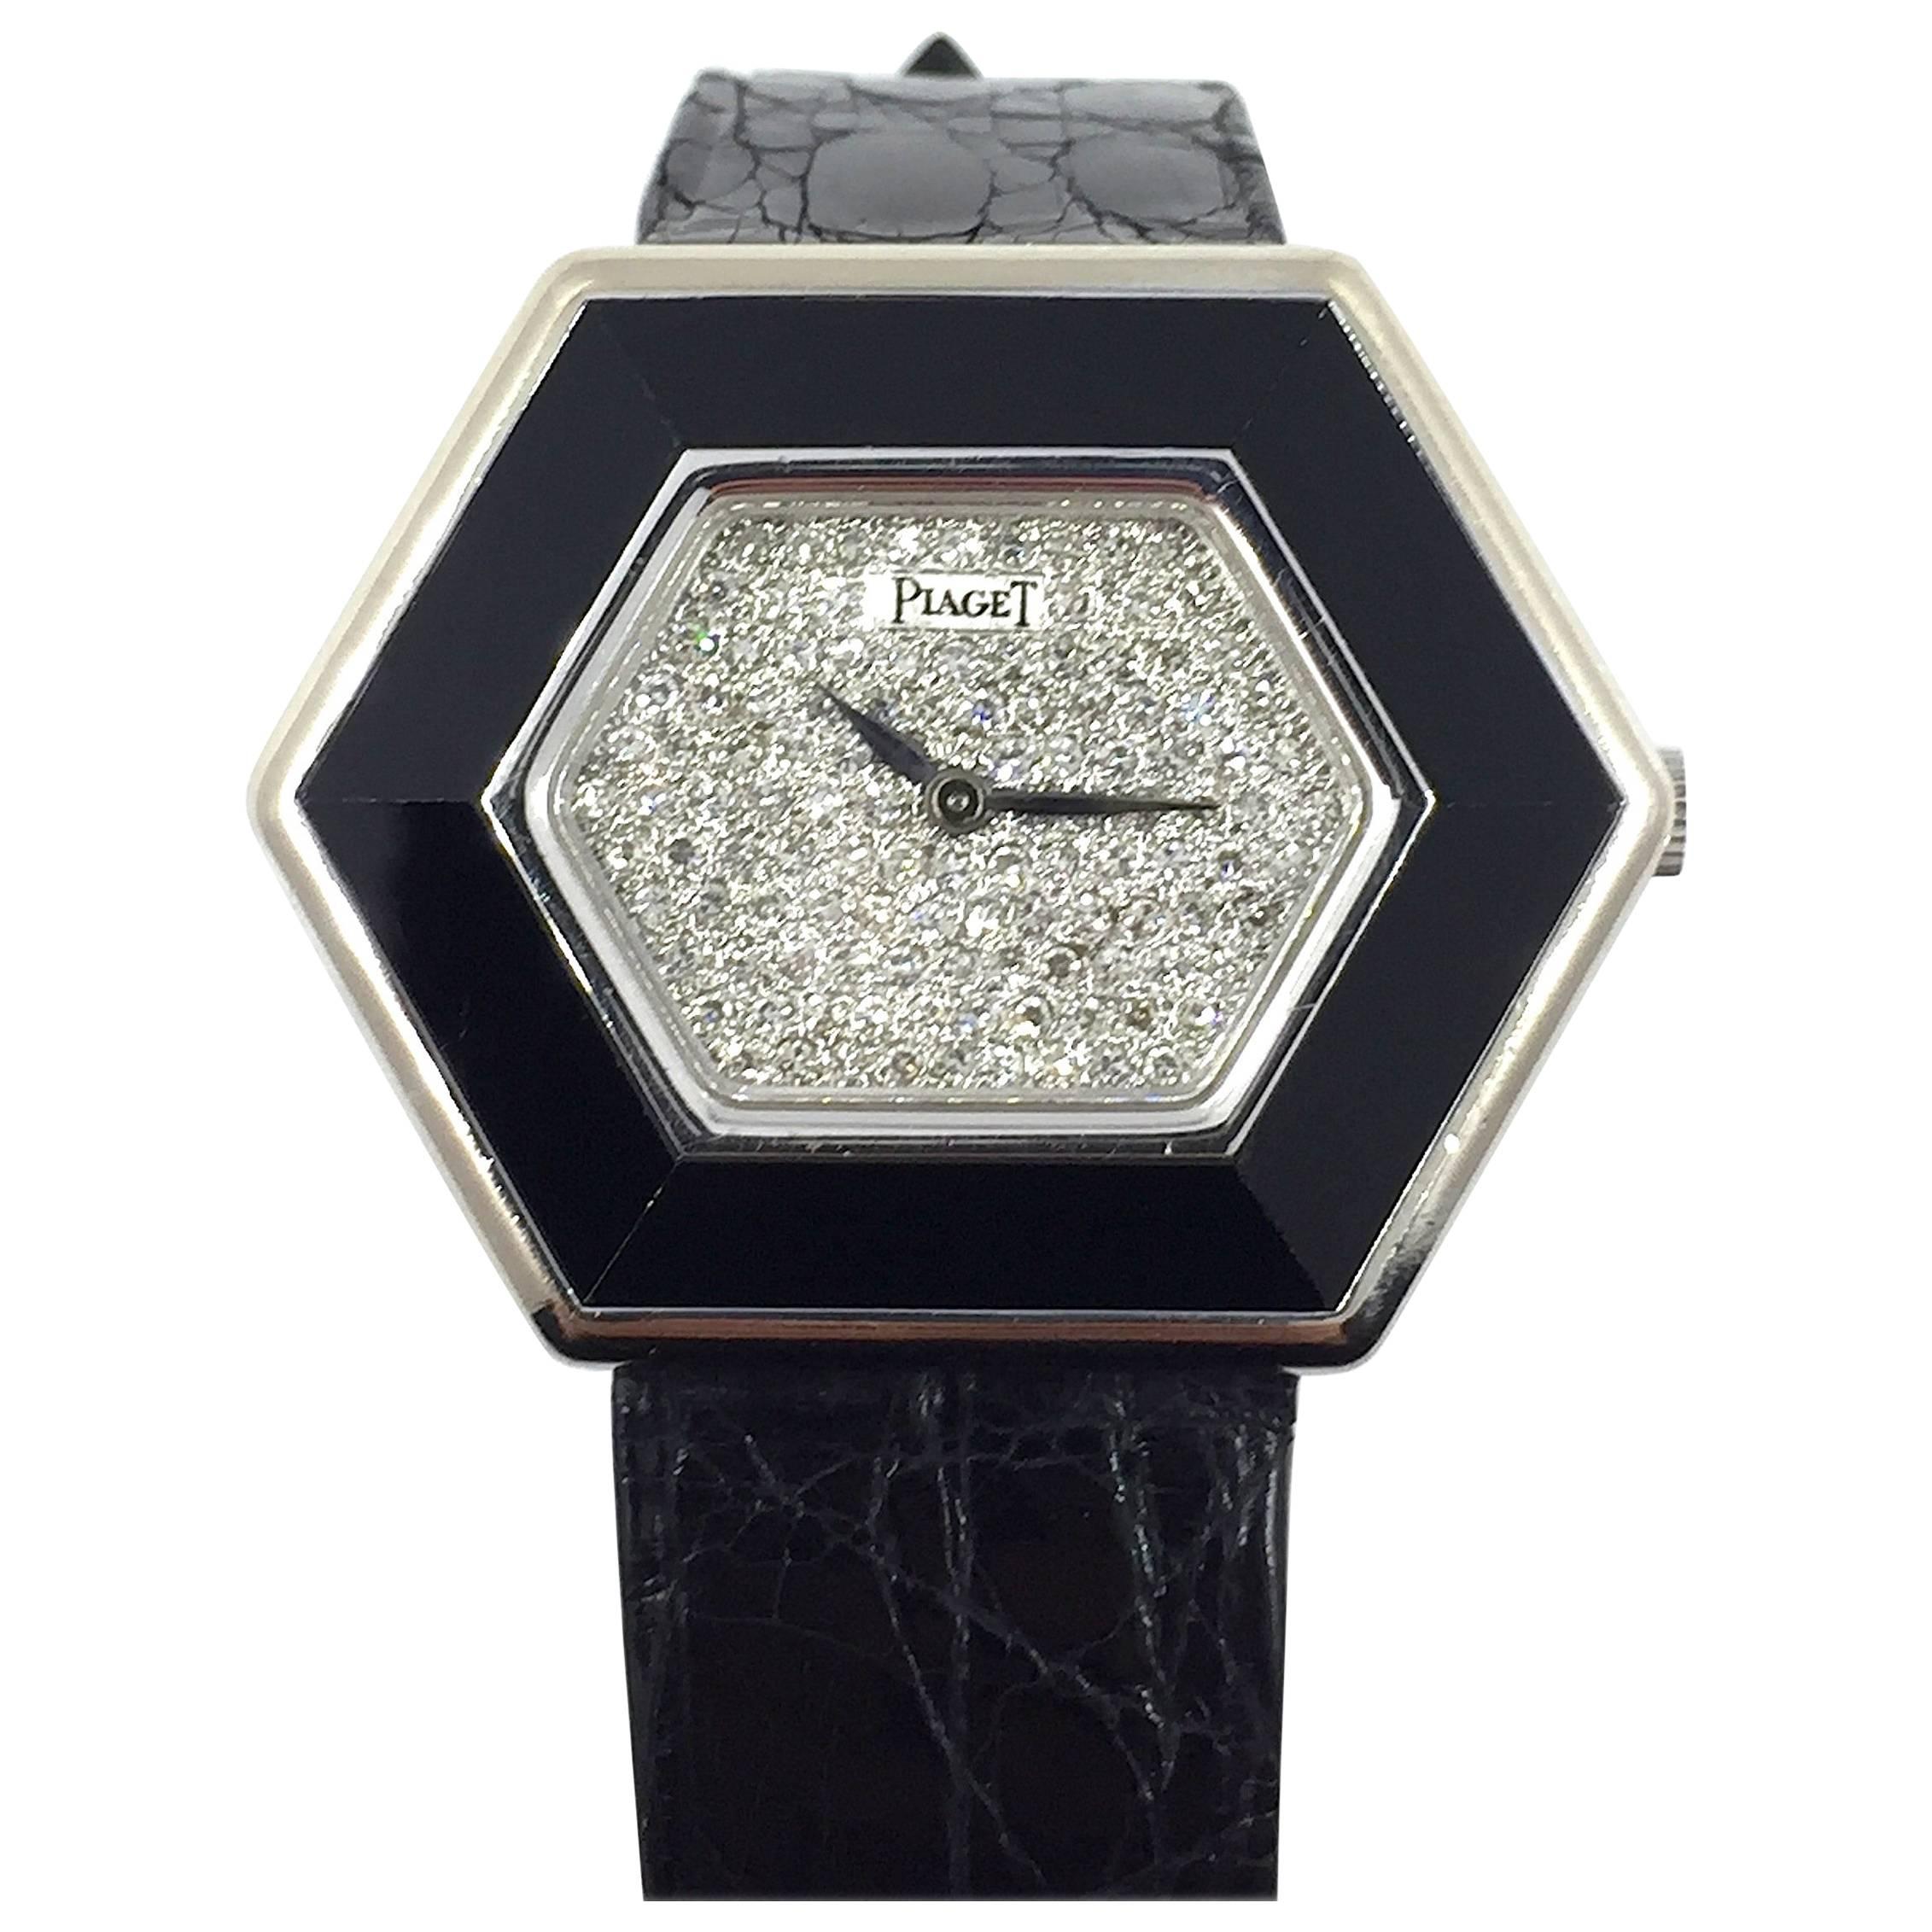 Piaget 18K White Gold Manual Wind Wristwatch
Factory Pave Diamond Dial Accented by Onyx Inlaid Bezel
26mm x 35mm
Piaget Manual Wind Movement
Sapphire Crystal
Comes Fitted on Original Piaget Leather Strap with Piaget 18K White Gold Buckle
Includes